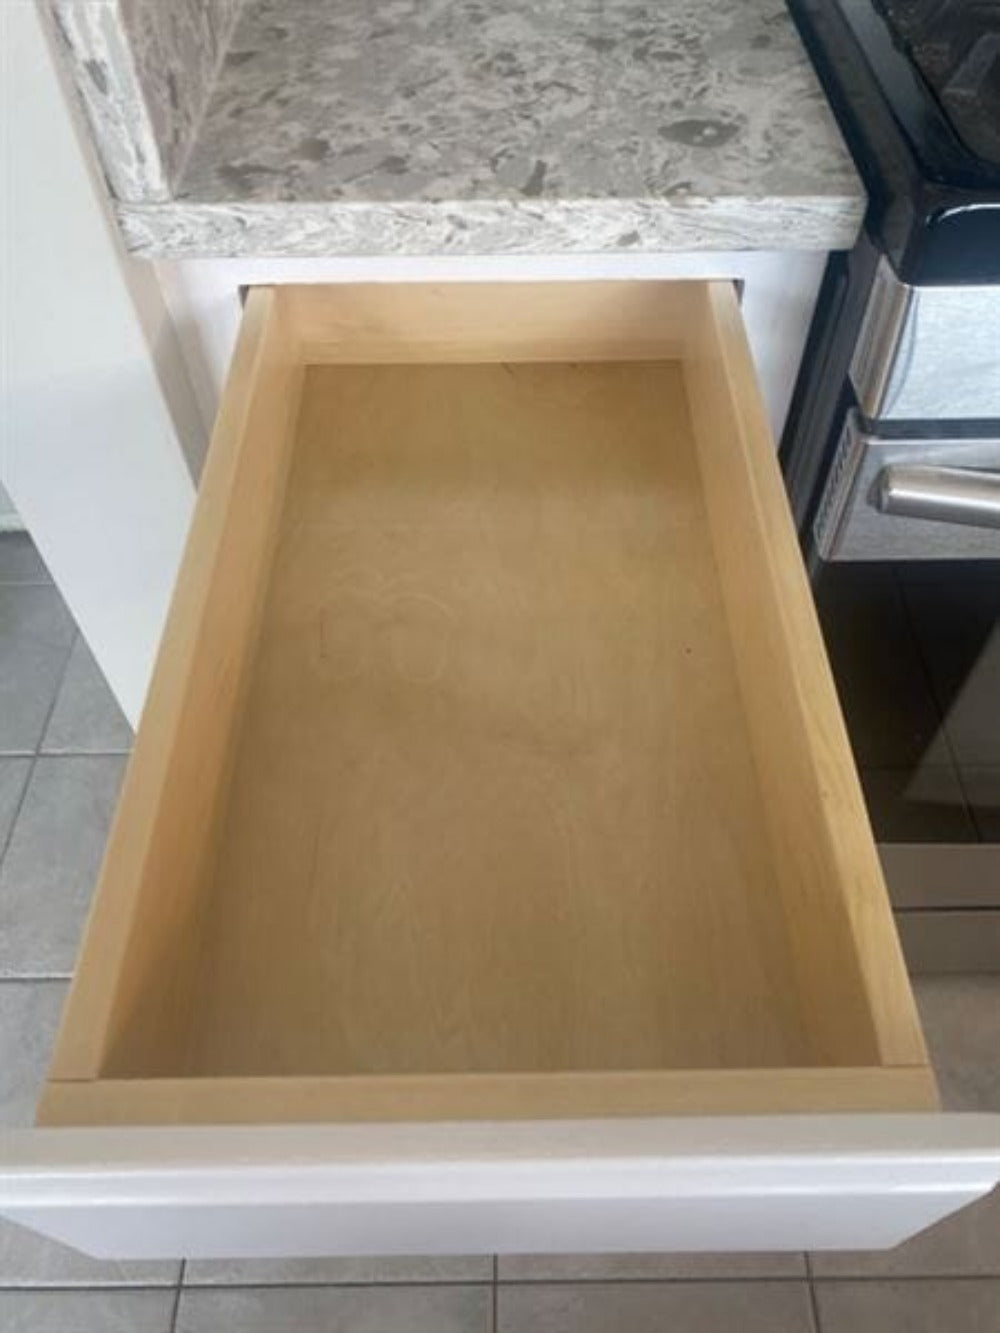 Can You Buy Just the Drawer Box? - Cabinet Now